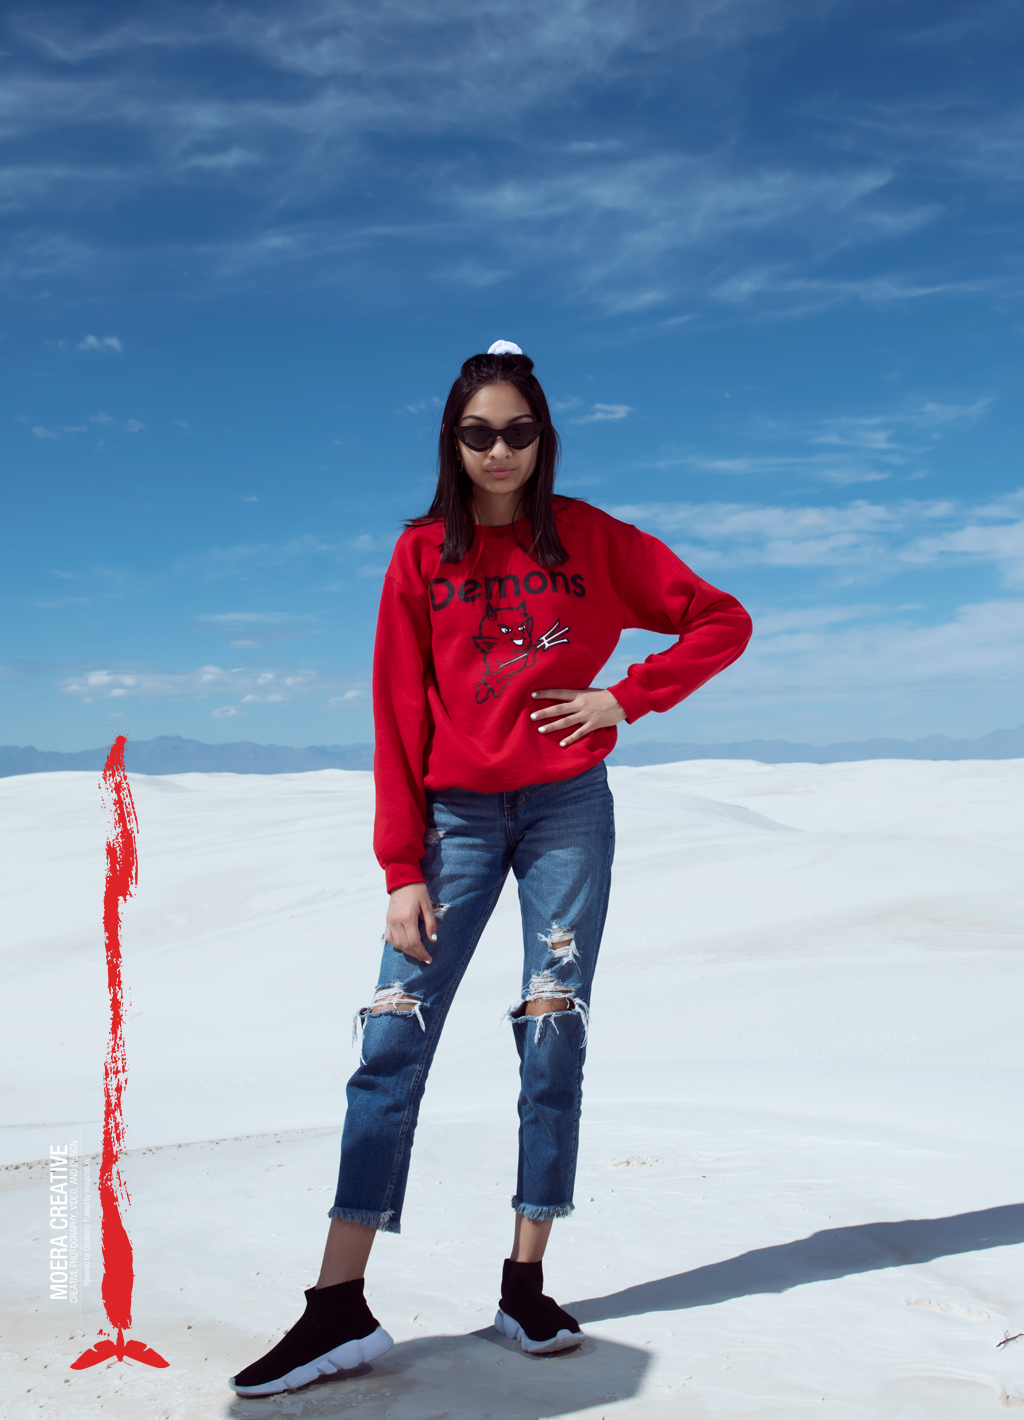 Moera Creative Photography by Erick Moya - White Sands New Mexico- Blog Post